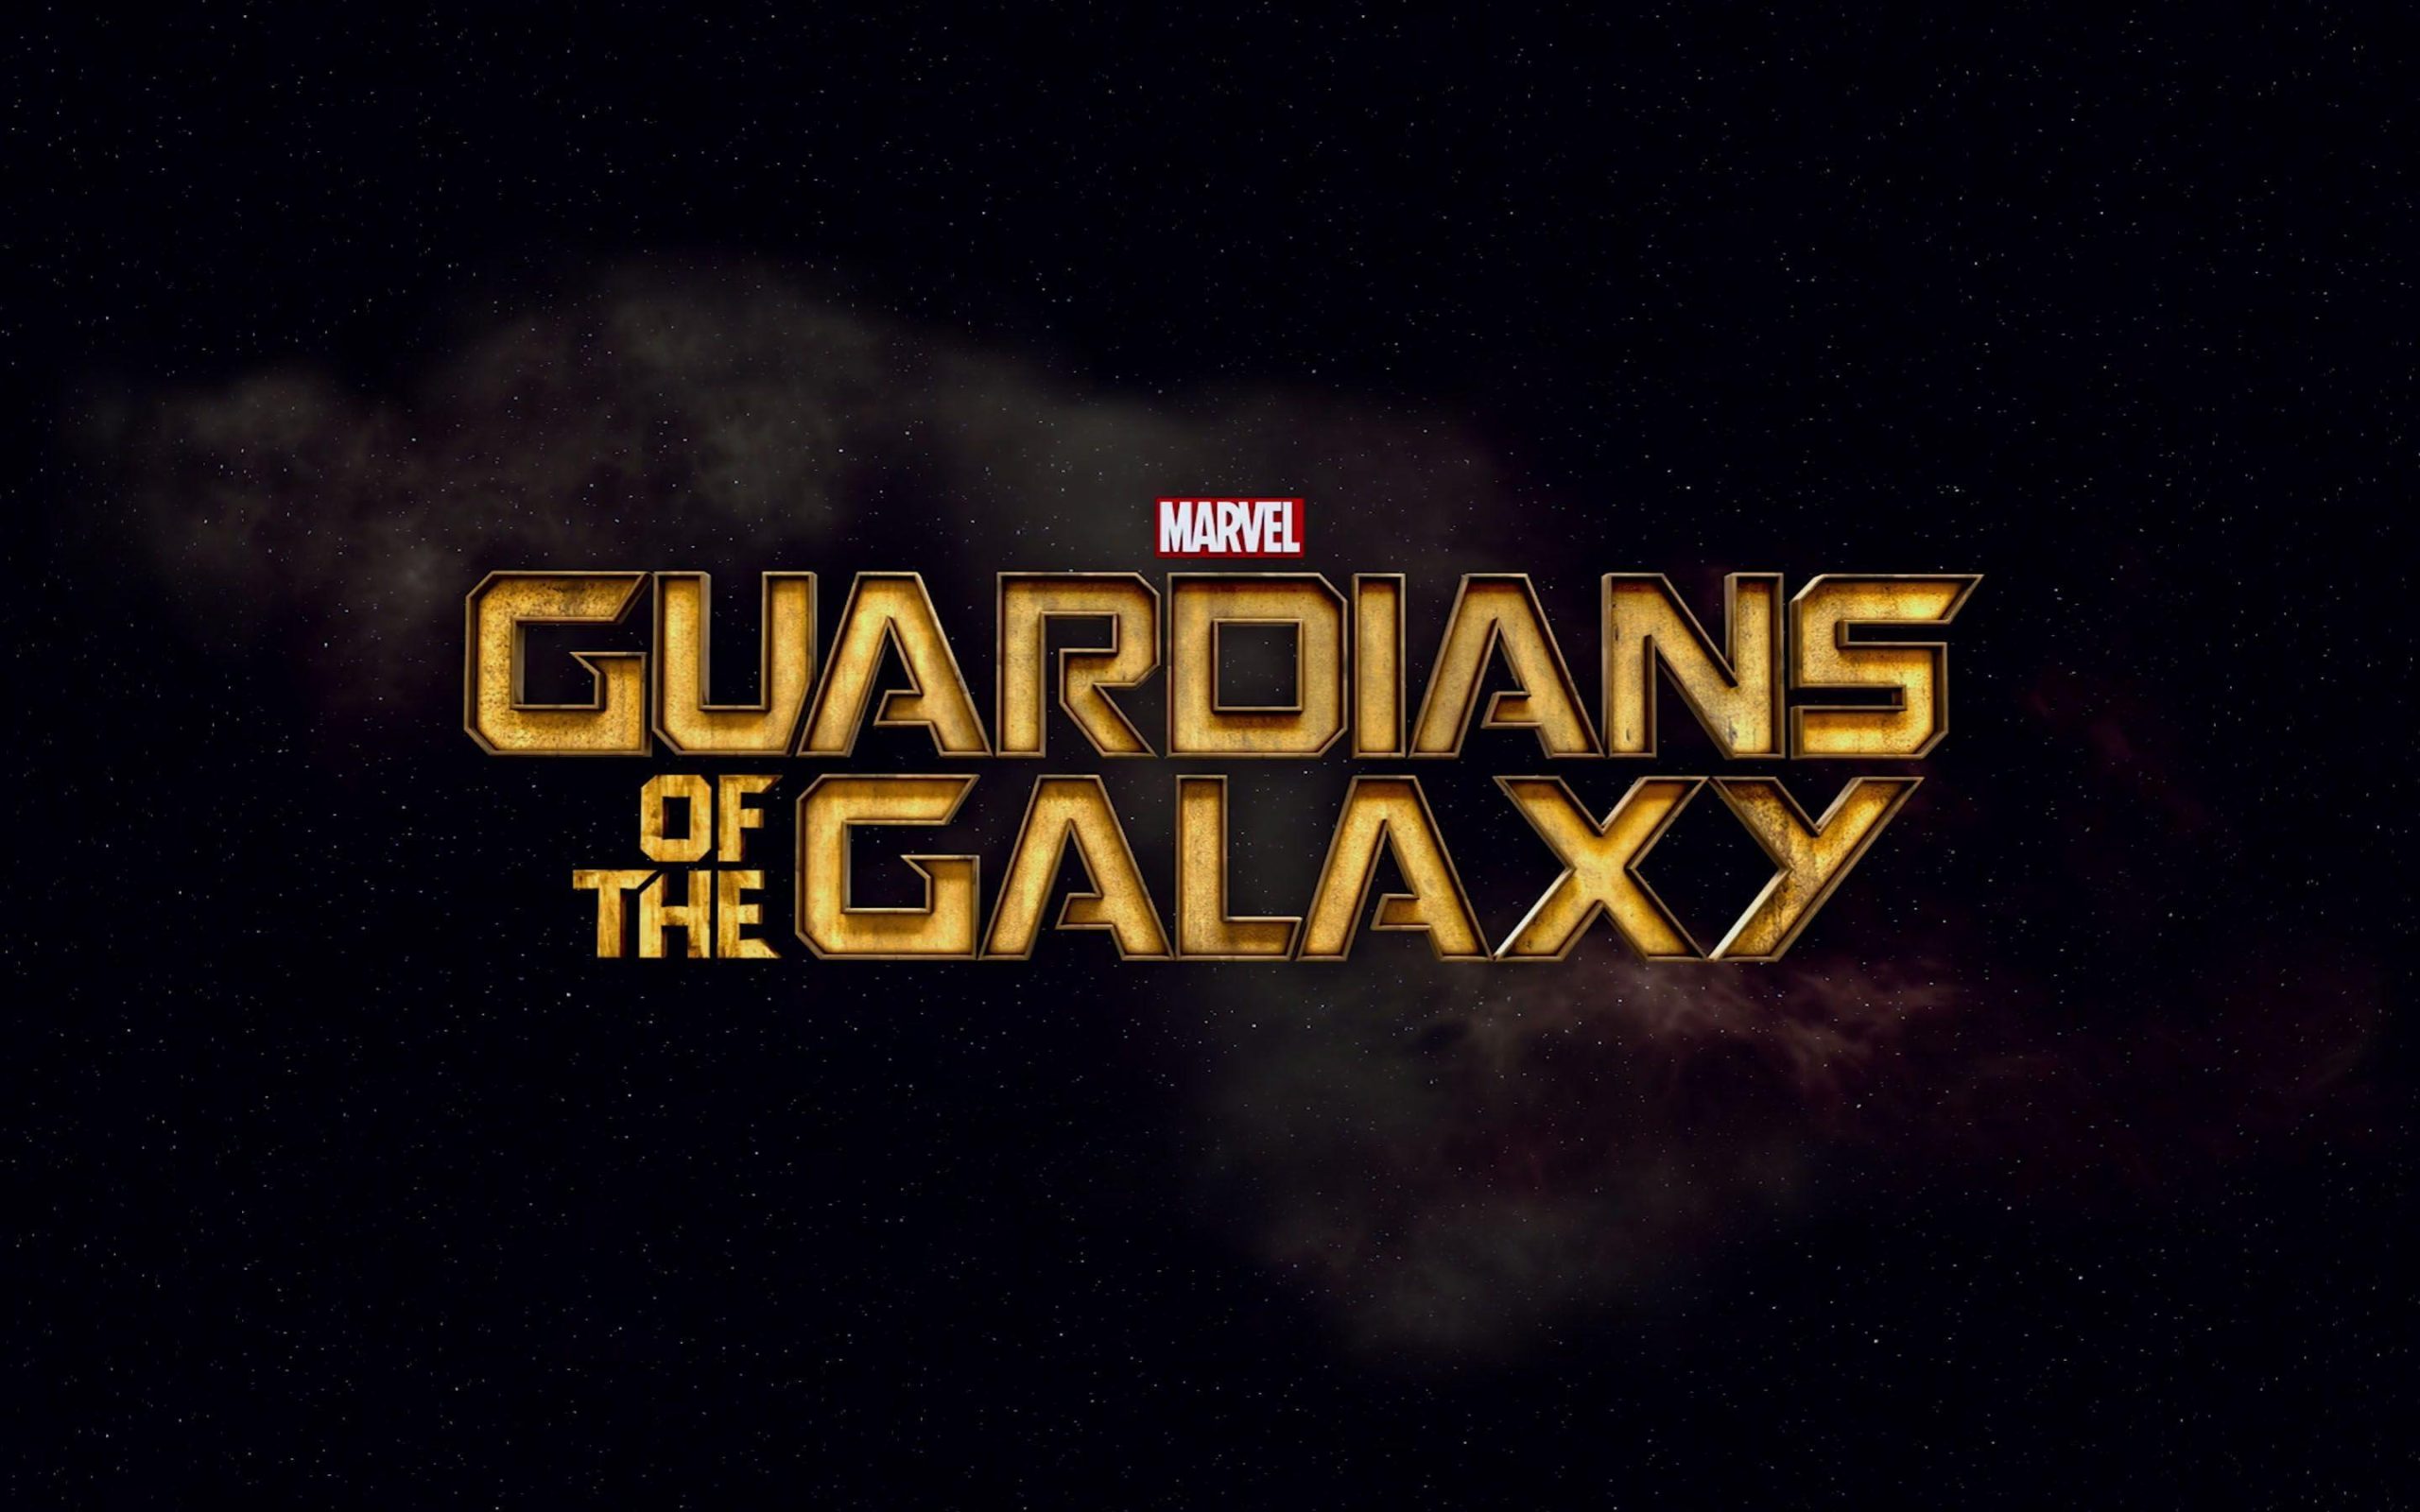 The Guardians Of The Galaxy Wallpaper